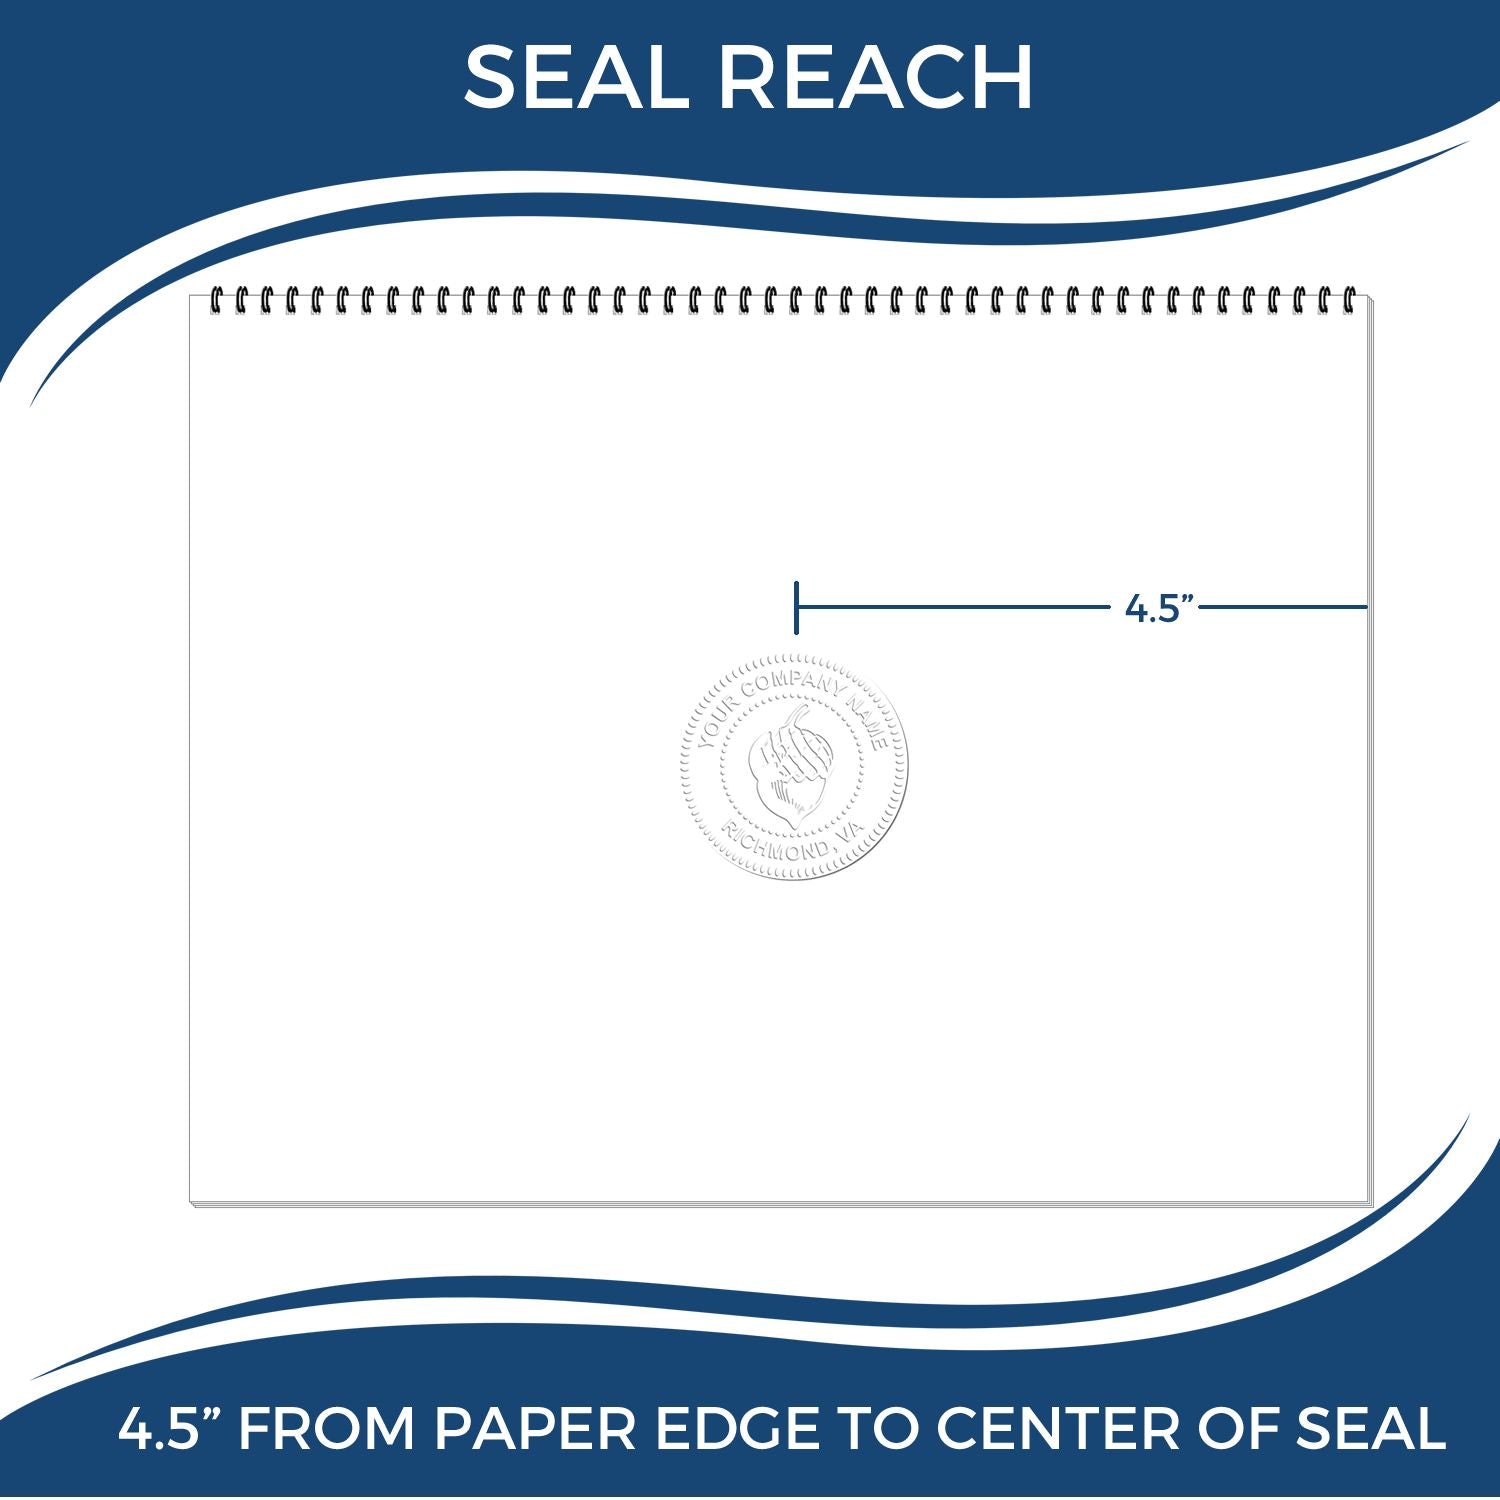 An infographic showing the seal reach which is represented by a ruler and a miniature seal image of the State of Oregon Extended Long Reach Geologist Seal